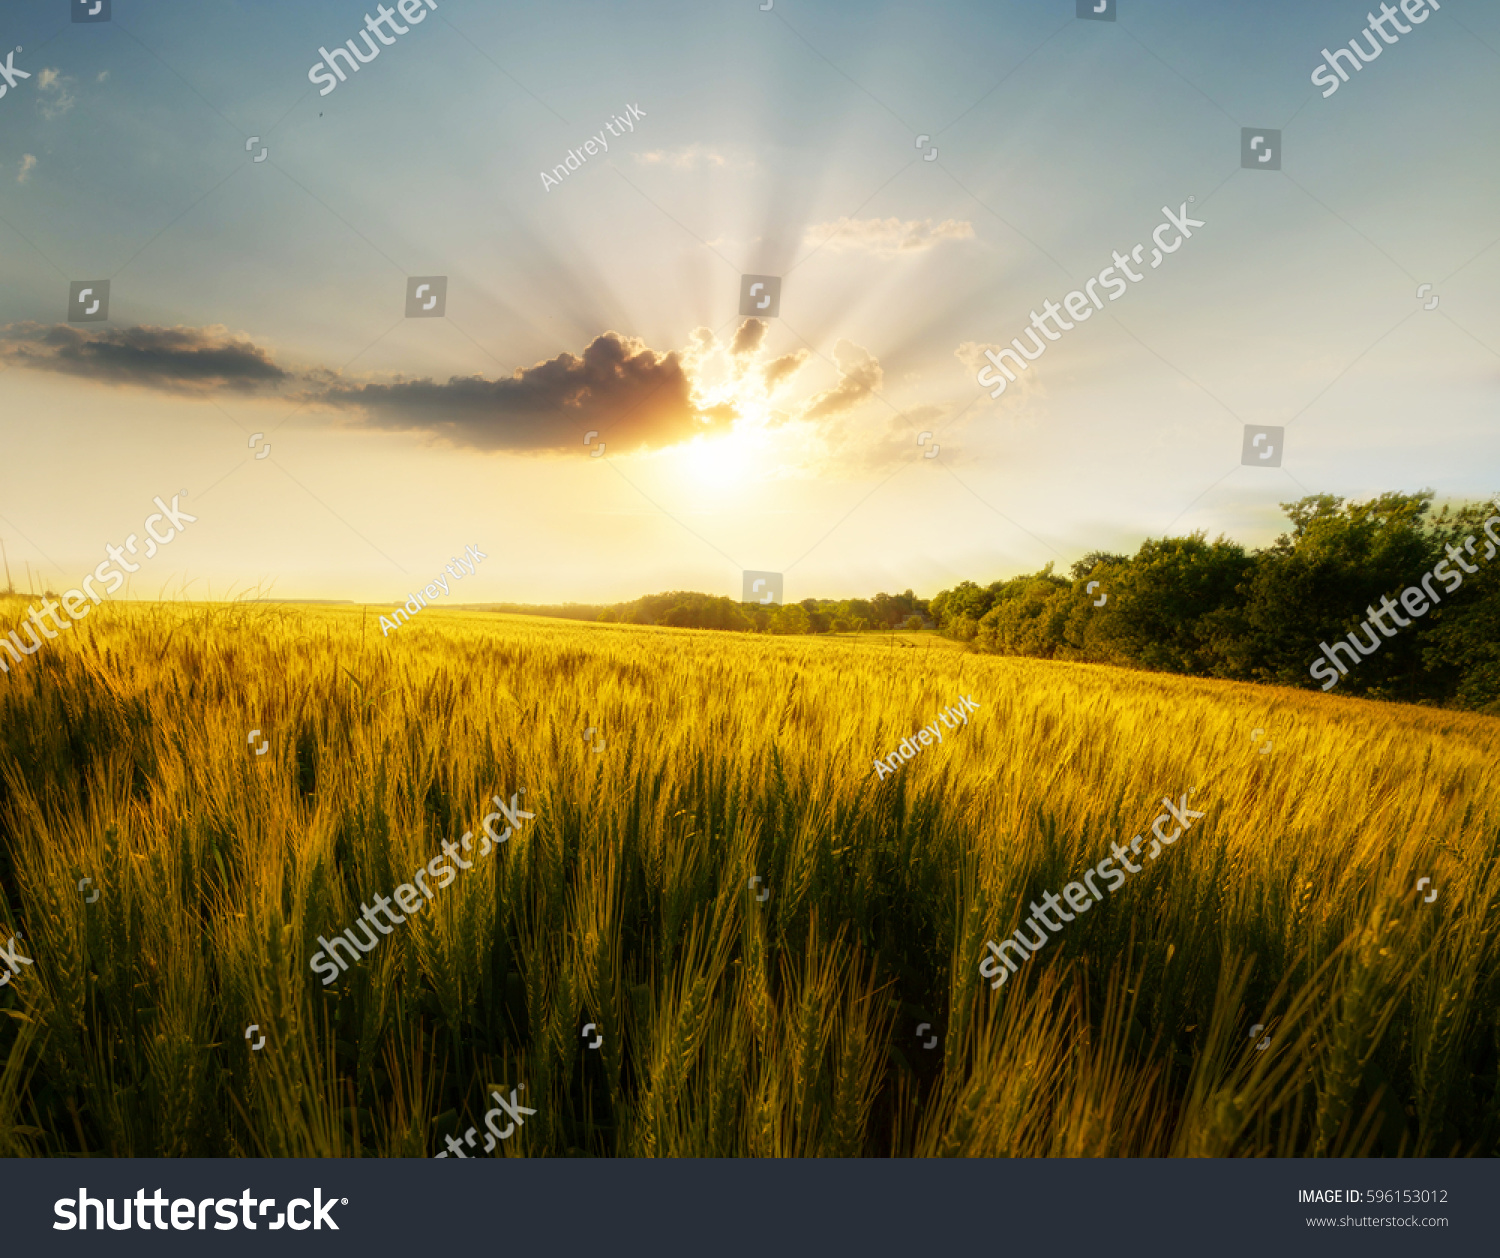 Wheat field on the background of the setting sun #596153012